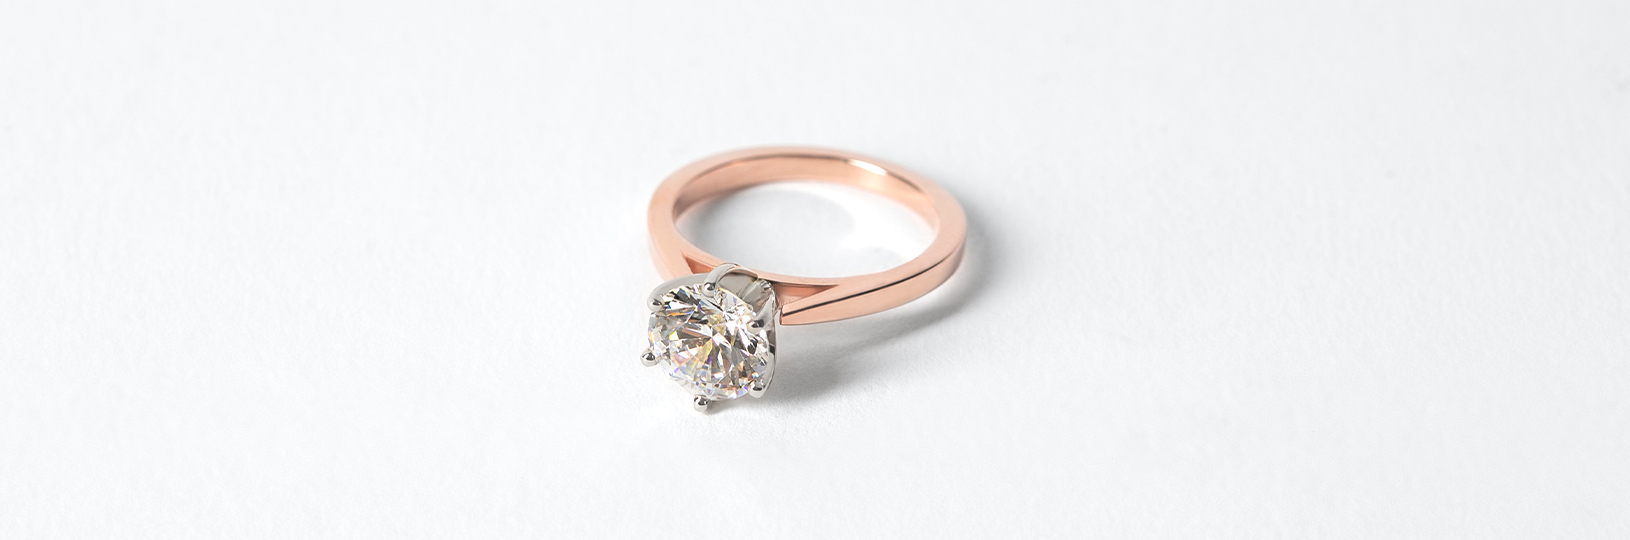 A solitaire rose gold engagement ring